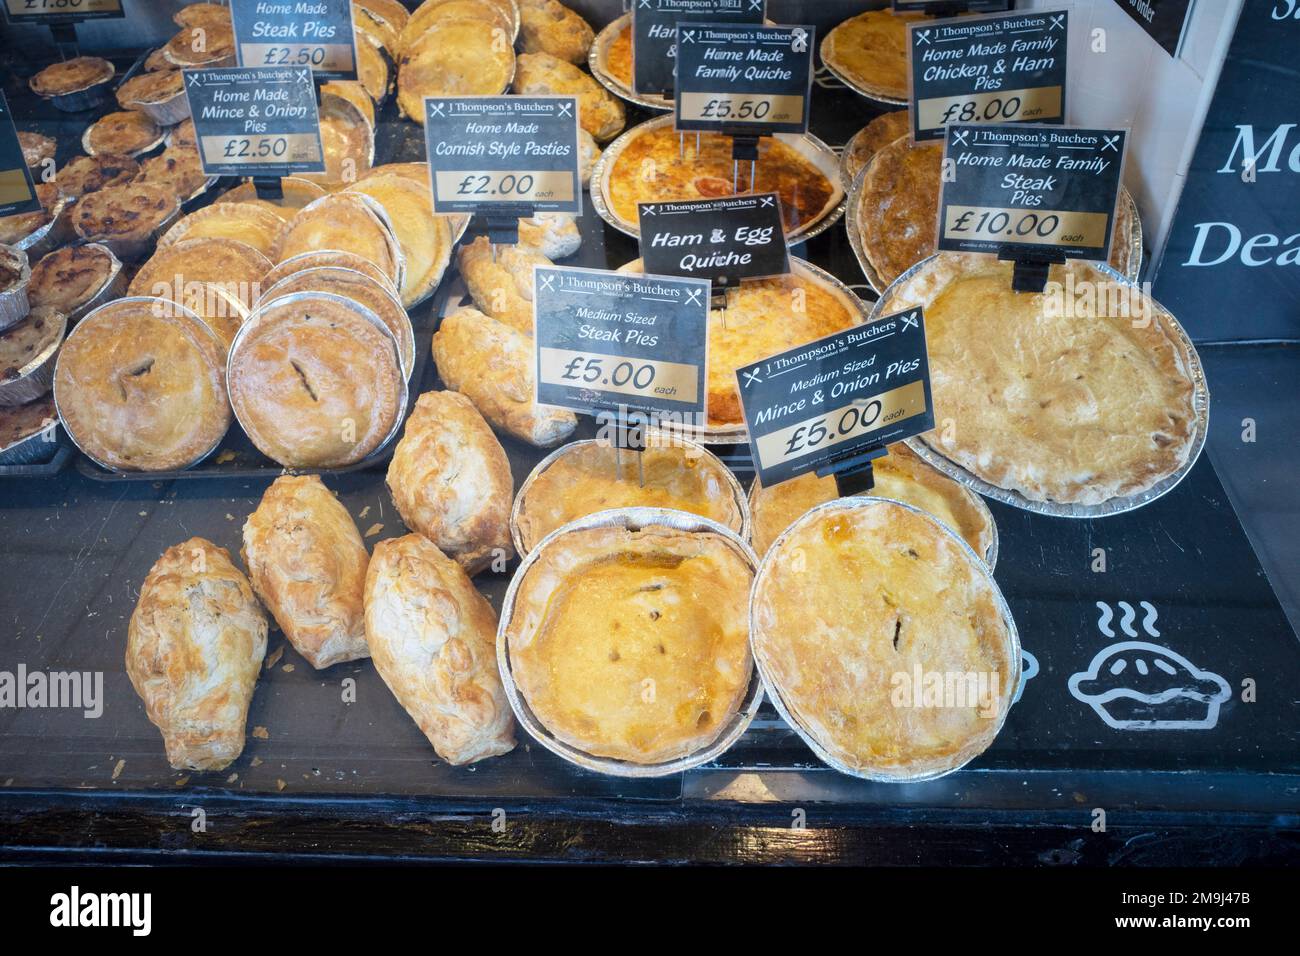 J Thompson's Butchers  shop window in Northallerton  with a display of various types of meat pies and pasties Stock Photo